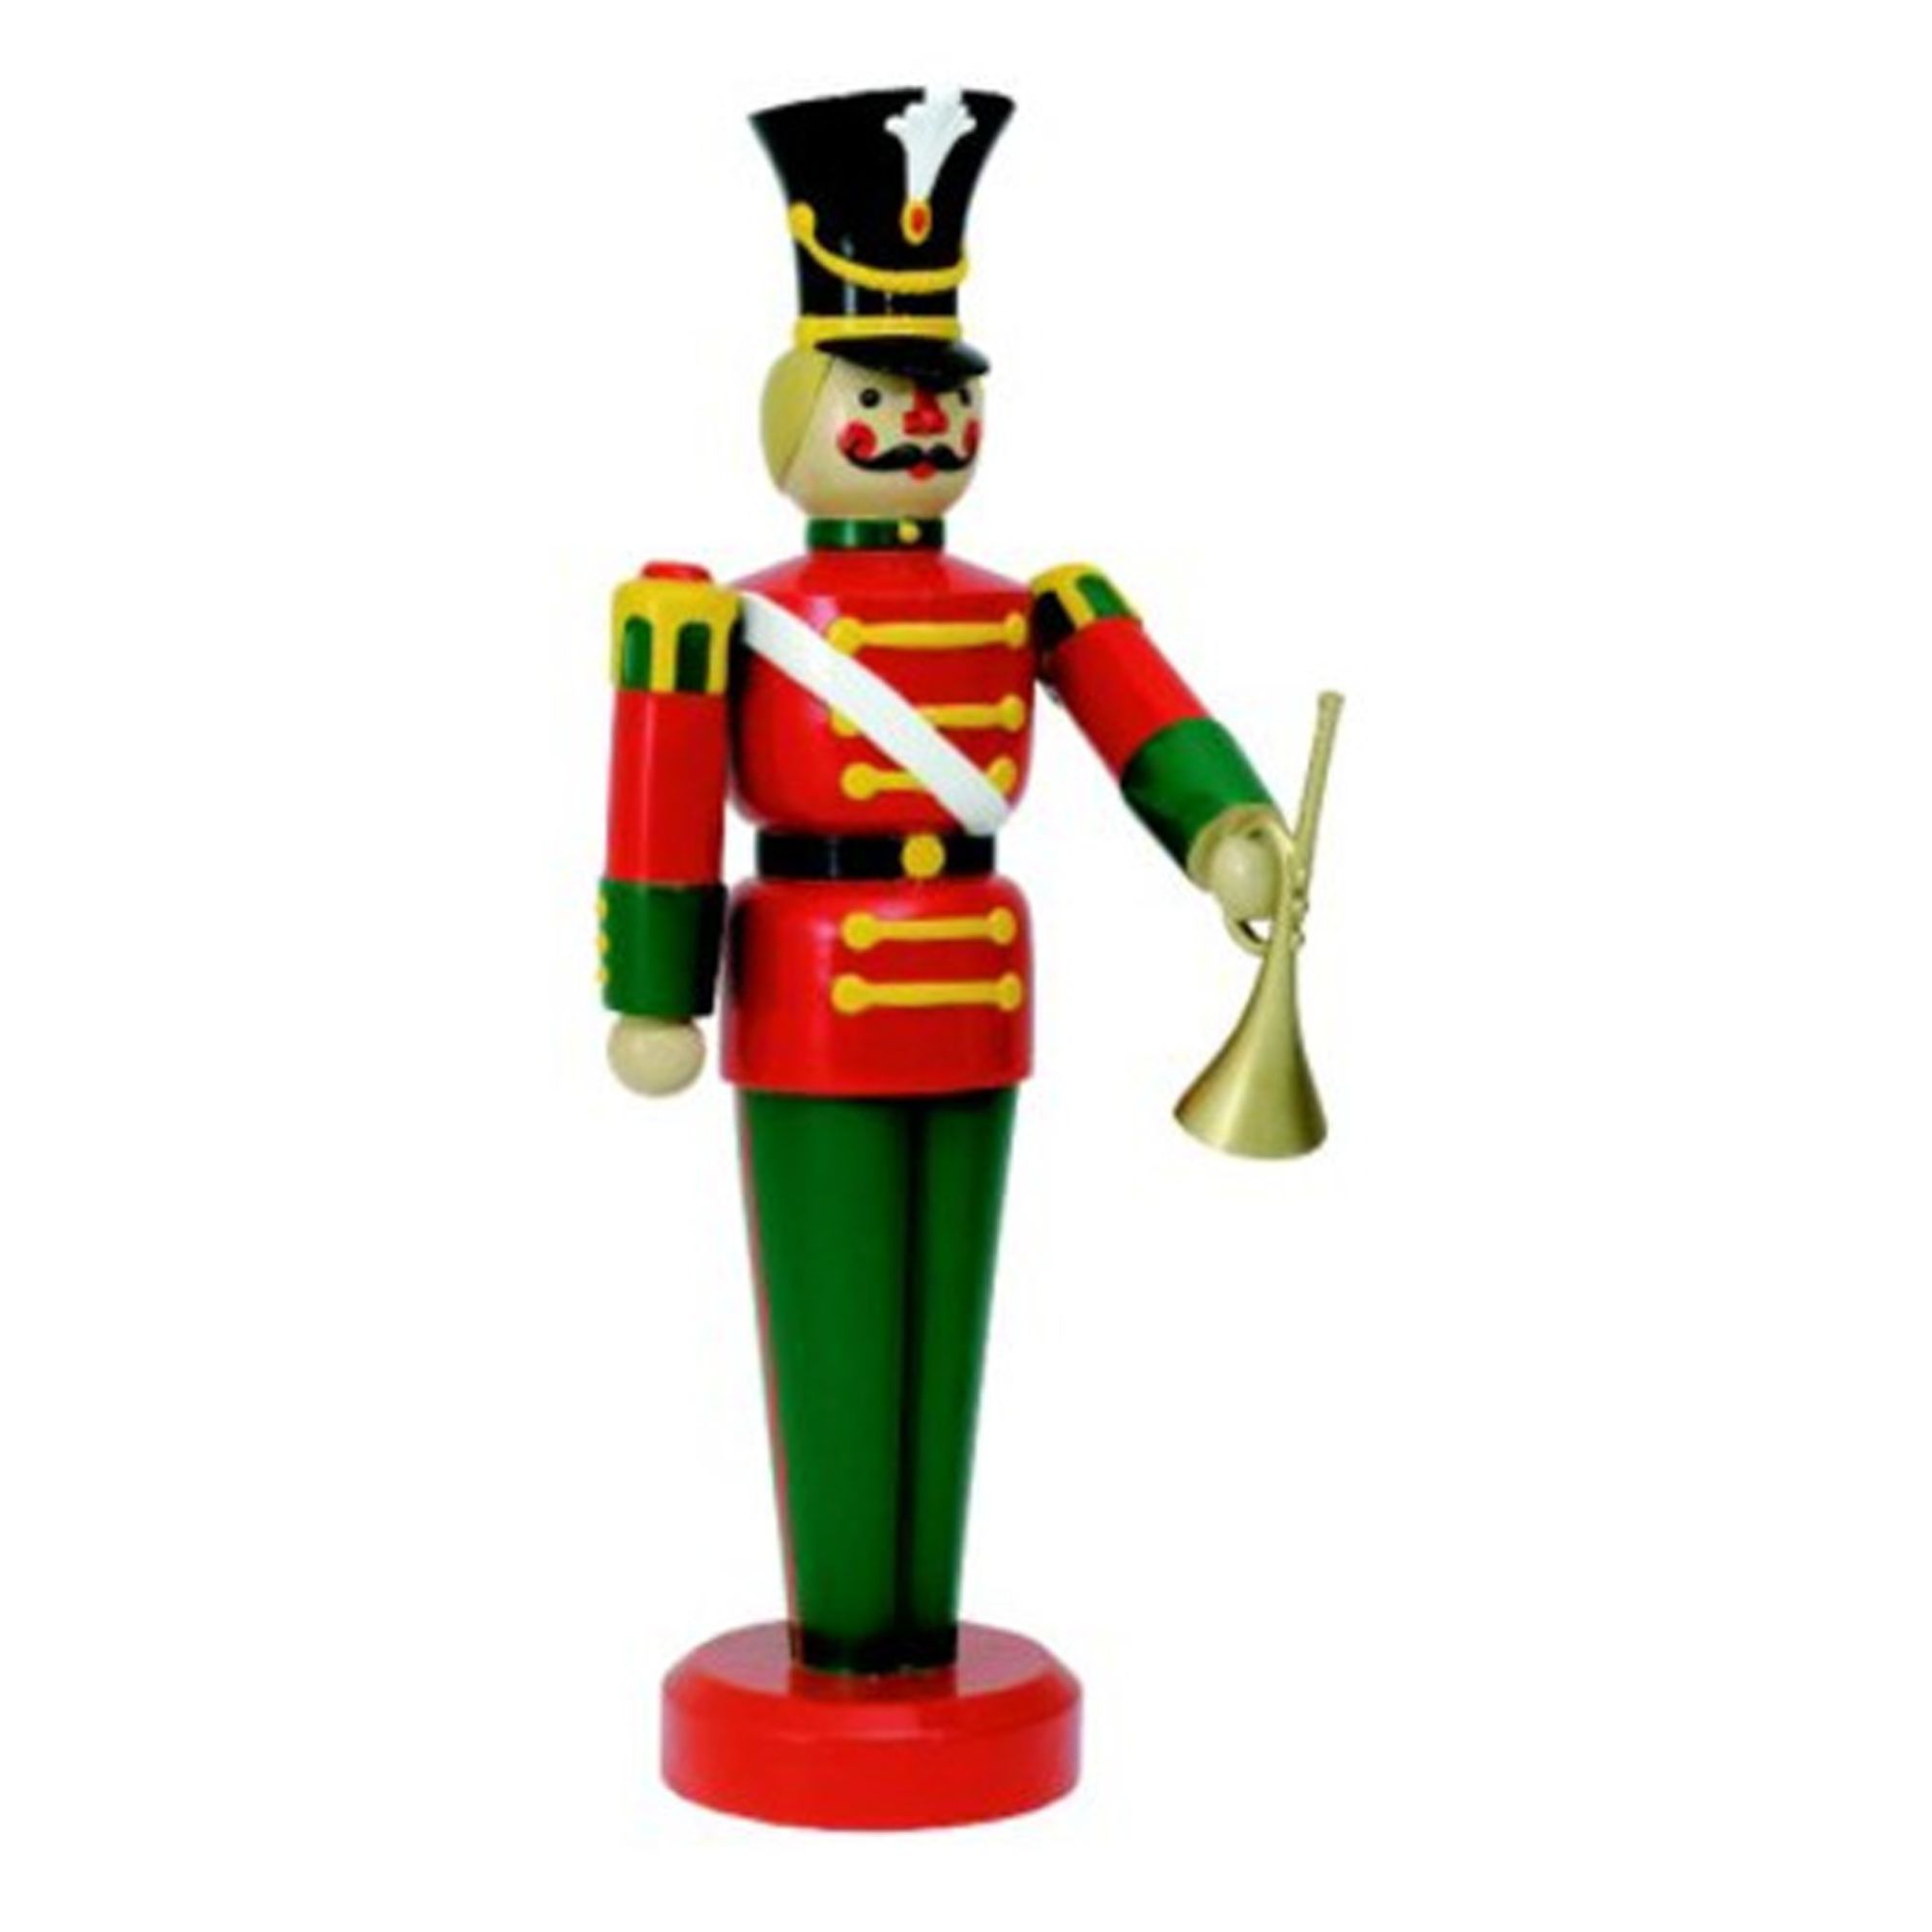 Barcana 75" Red and Green Life Size Soldier Toy Christmas Decor